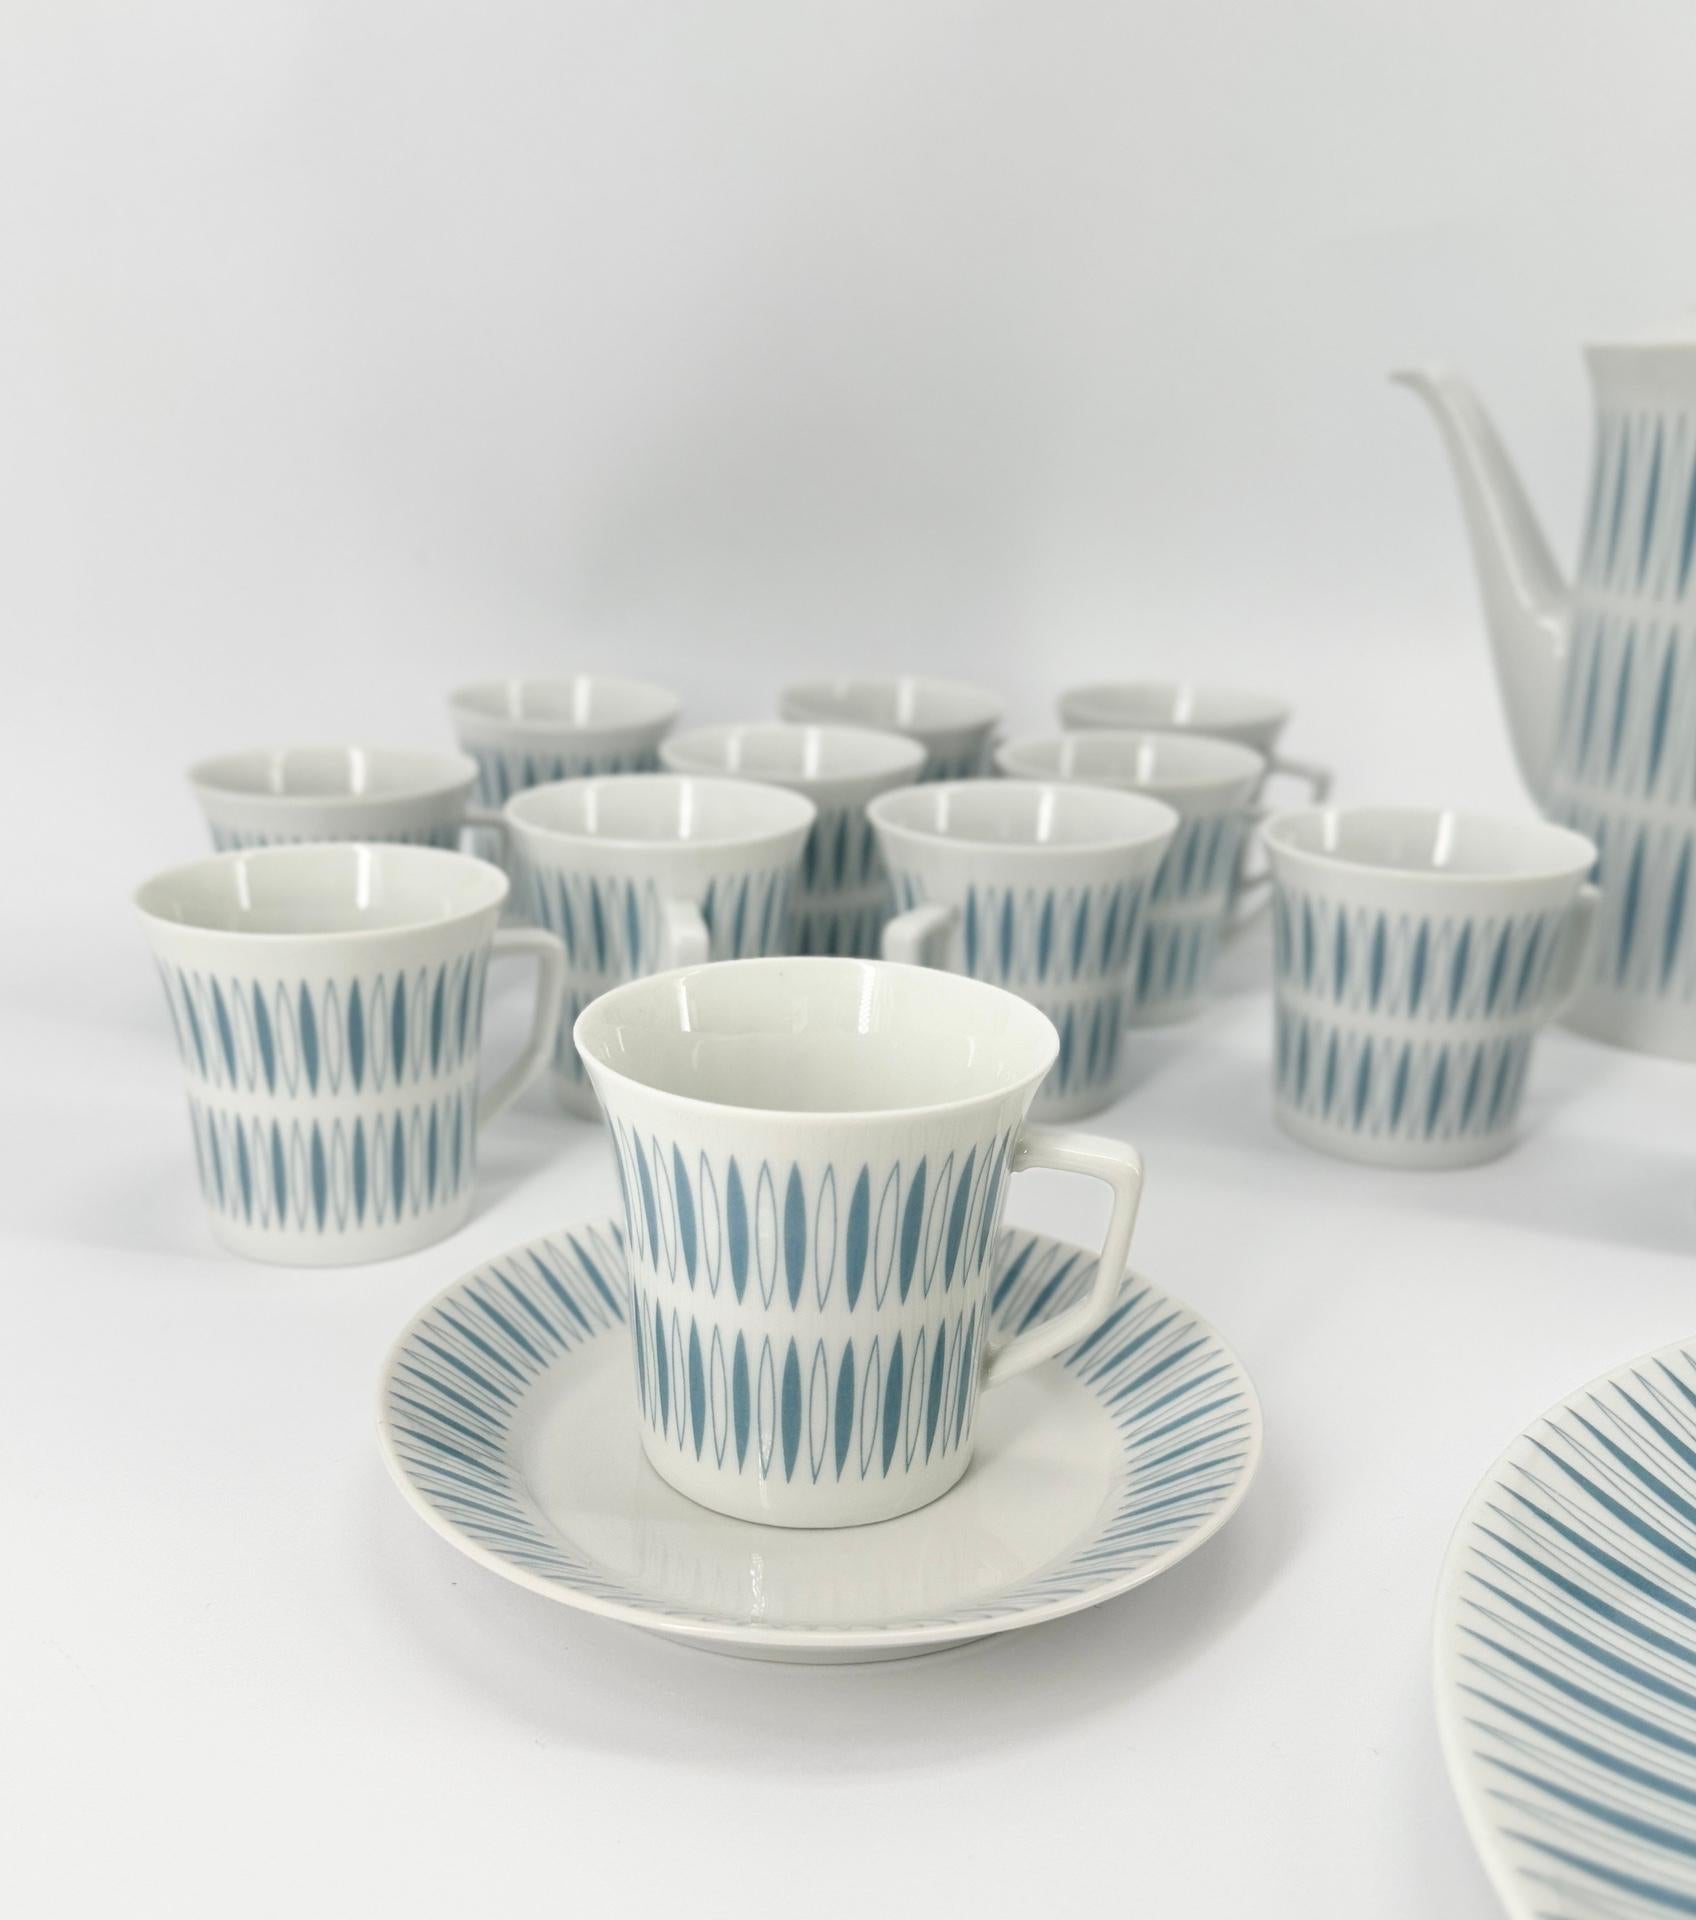 Mid-20th Century Porcelain Tea Coffee and Dessert Set Furstenberg 1960’s White and Blue 37 Pieces